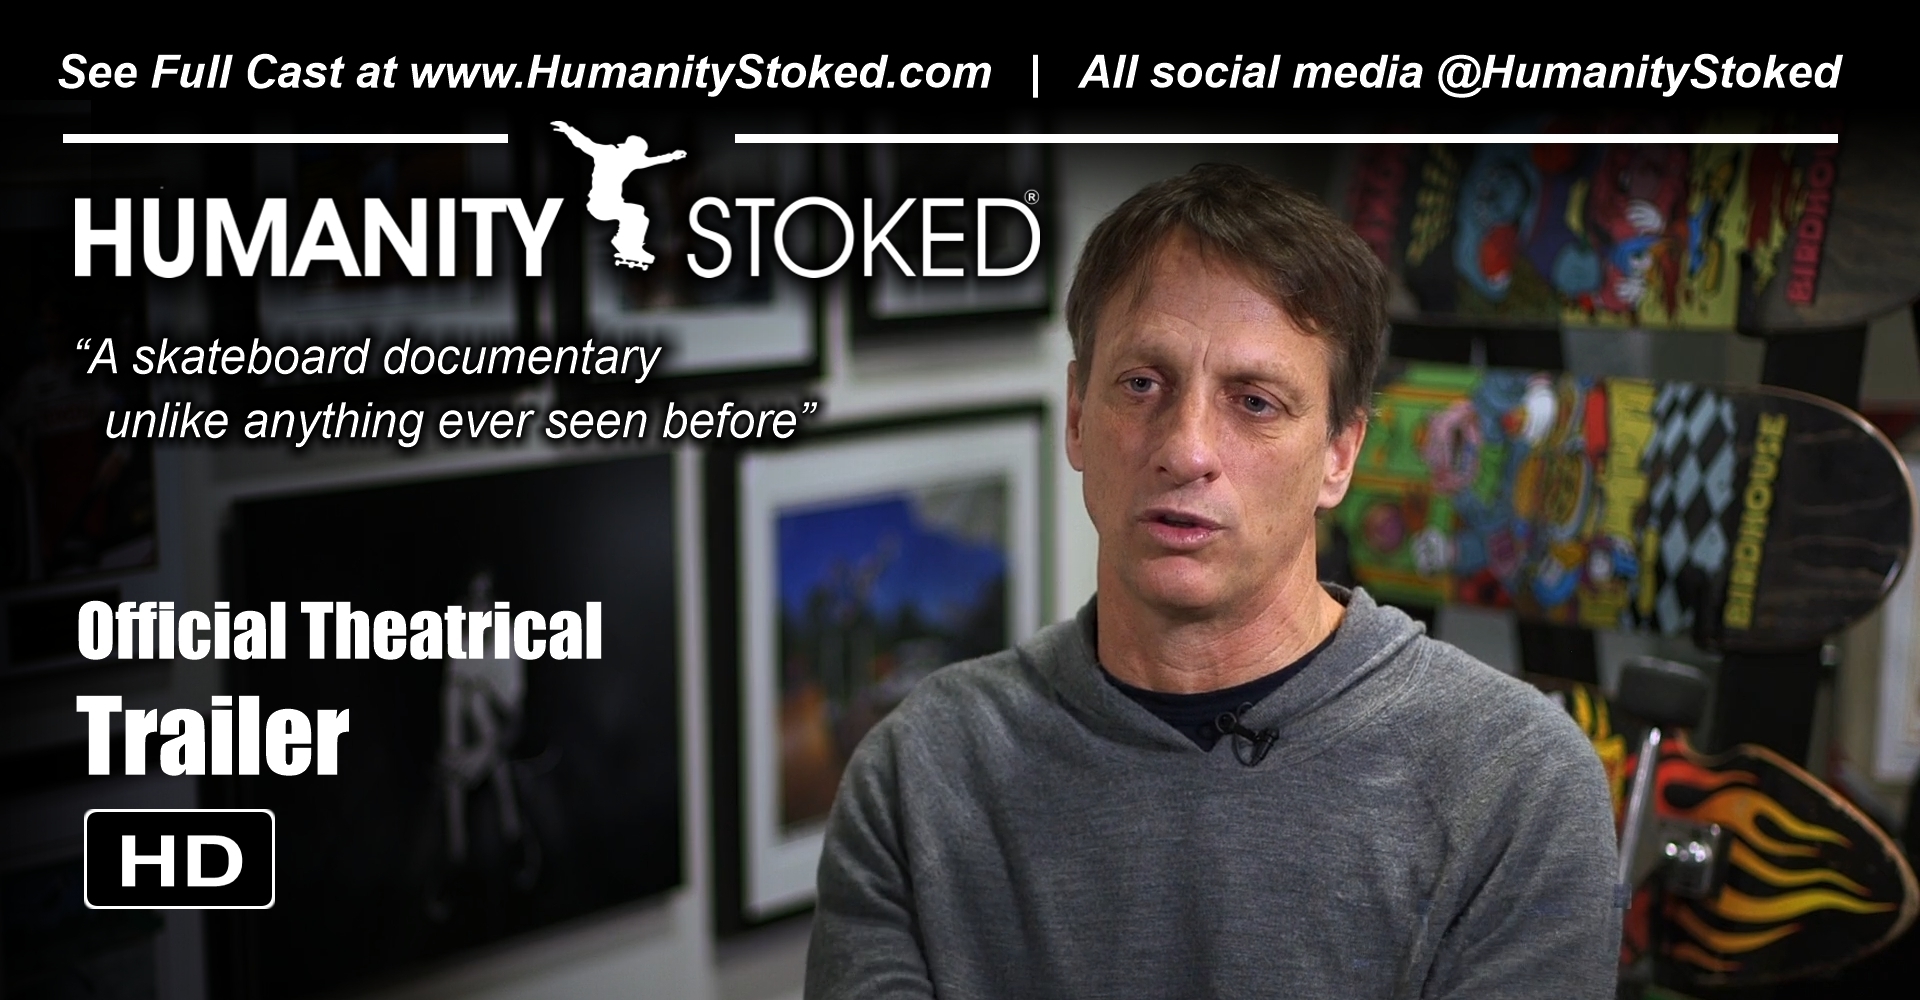 Humanity Stoked Movie Premier w/ live talk by filmmaker - Nov 4th at 2:15 PM - St Louis Galleria, Richmond Heights, Missouri, United States